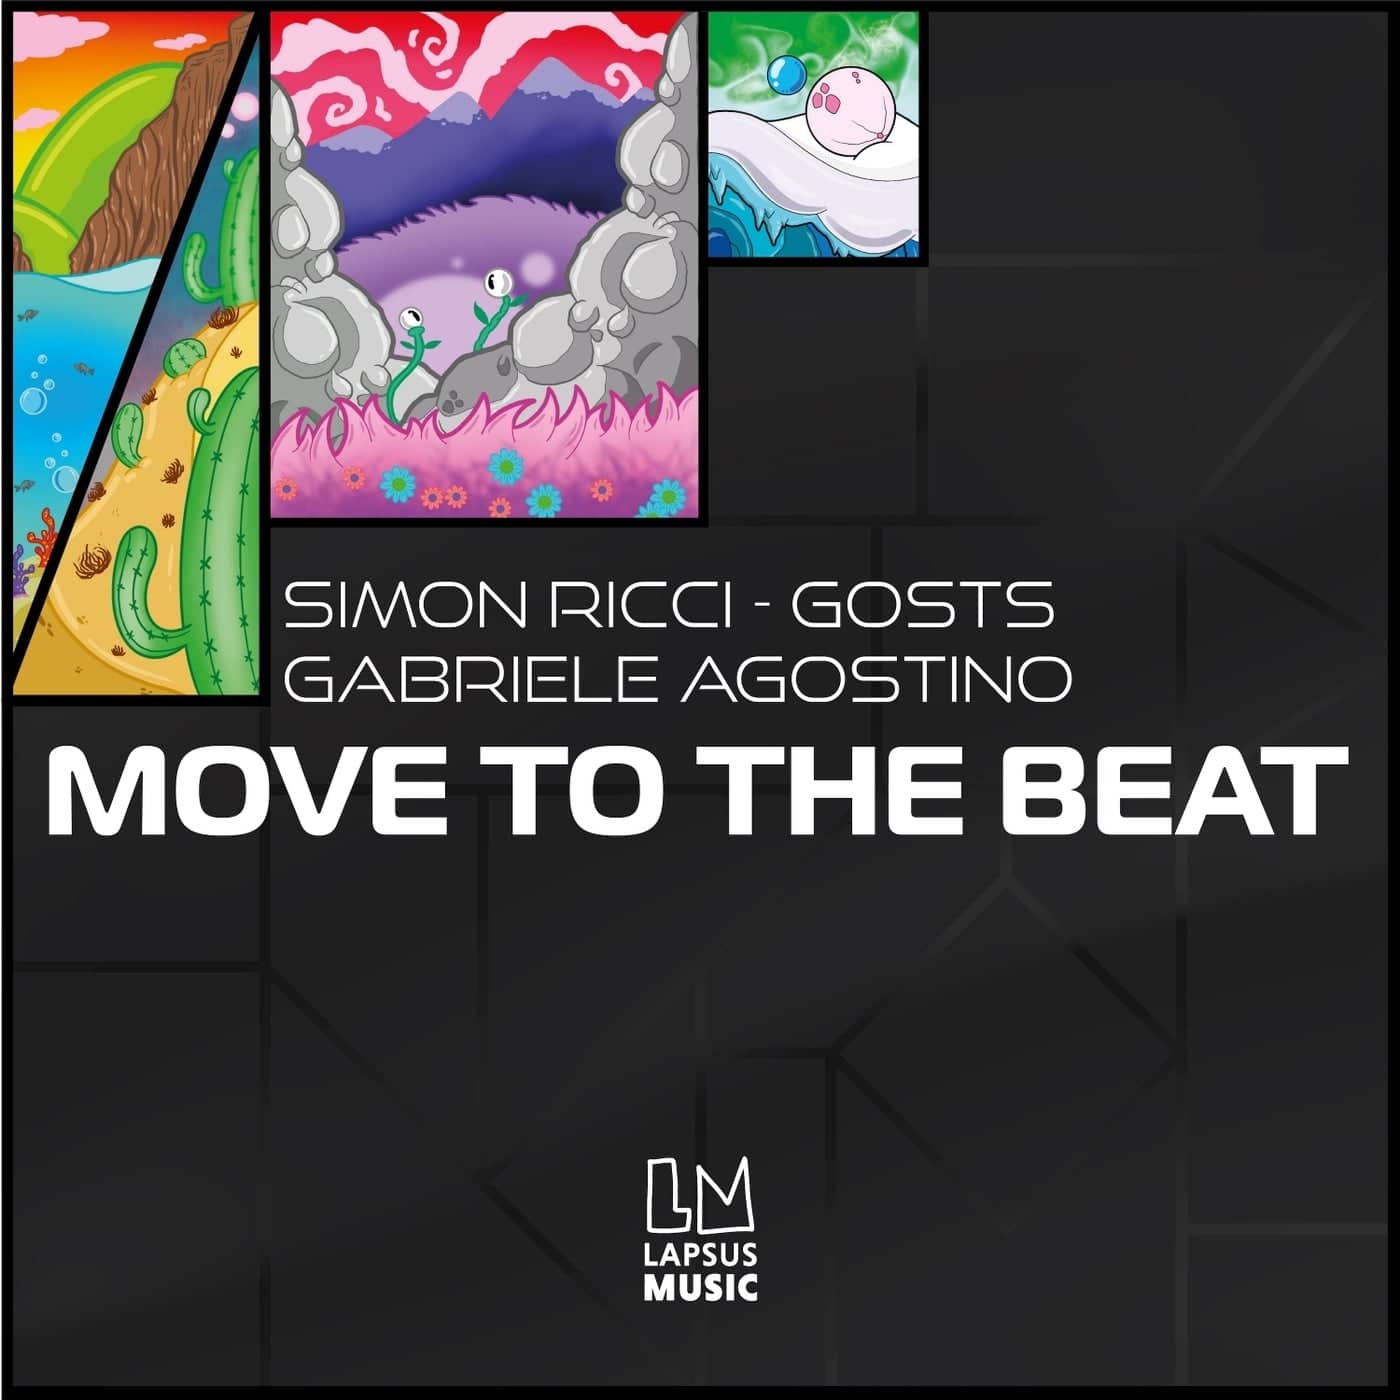 Download Simon Ricci, Gosts, Gabriele Agostino - Move to the Beat (Extended Mix) on Electrobuzz